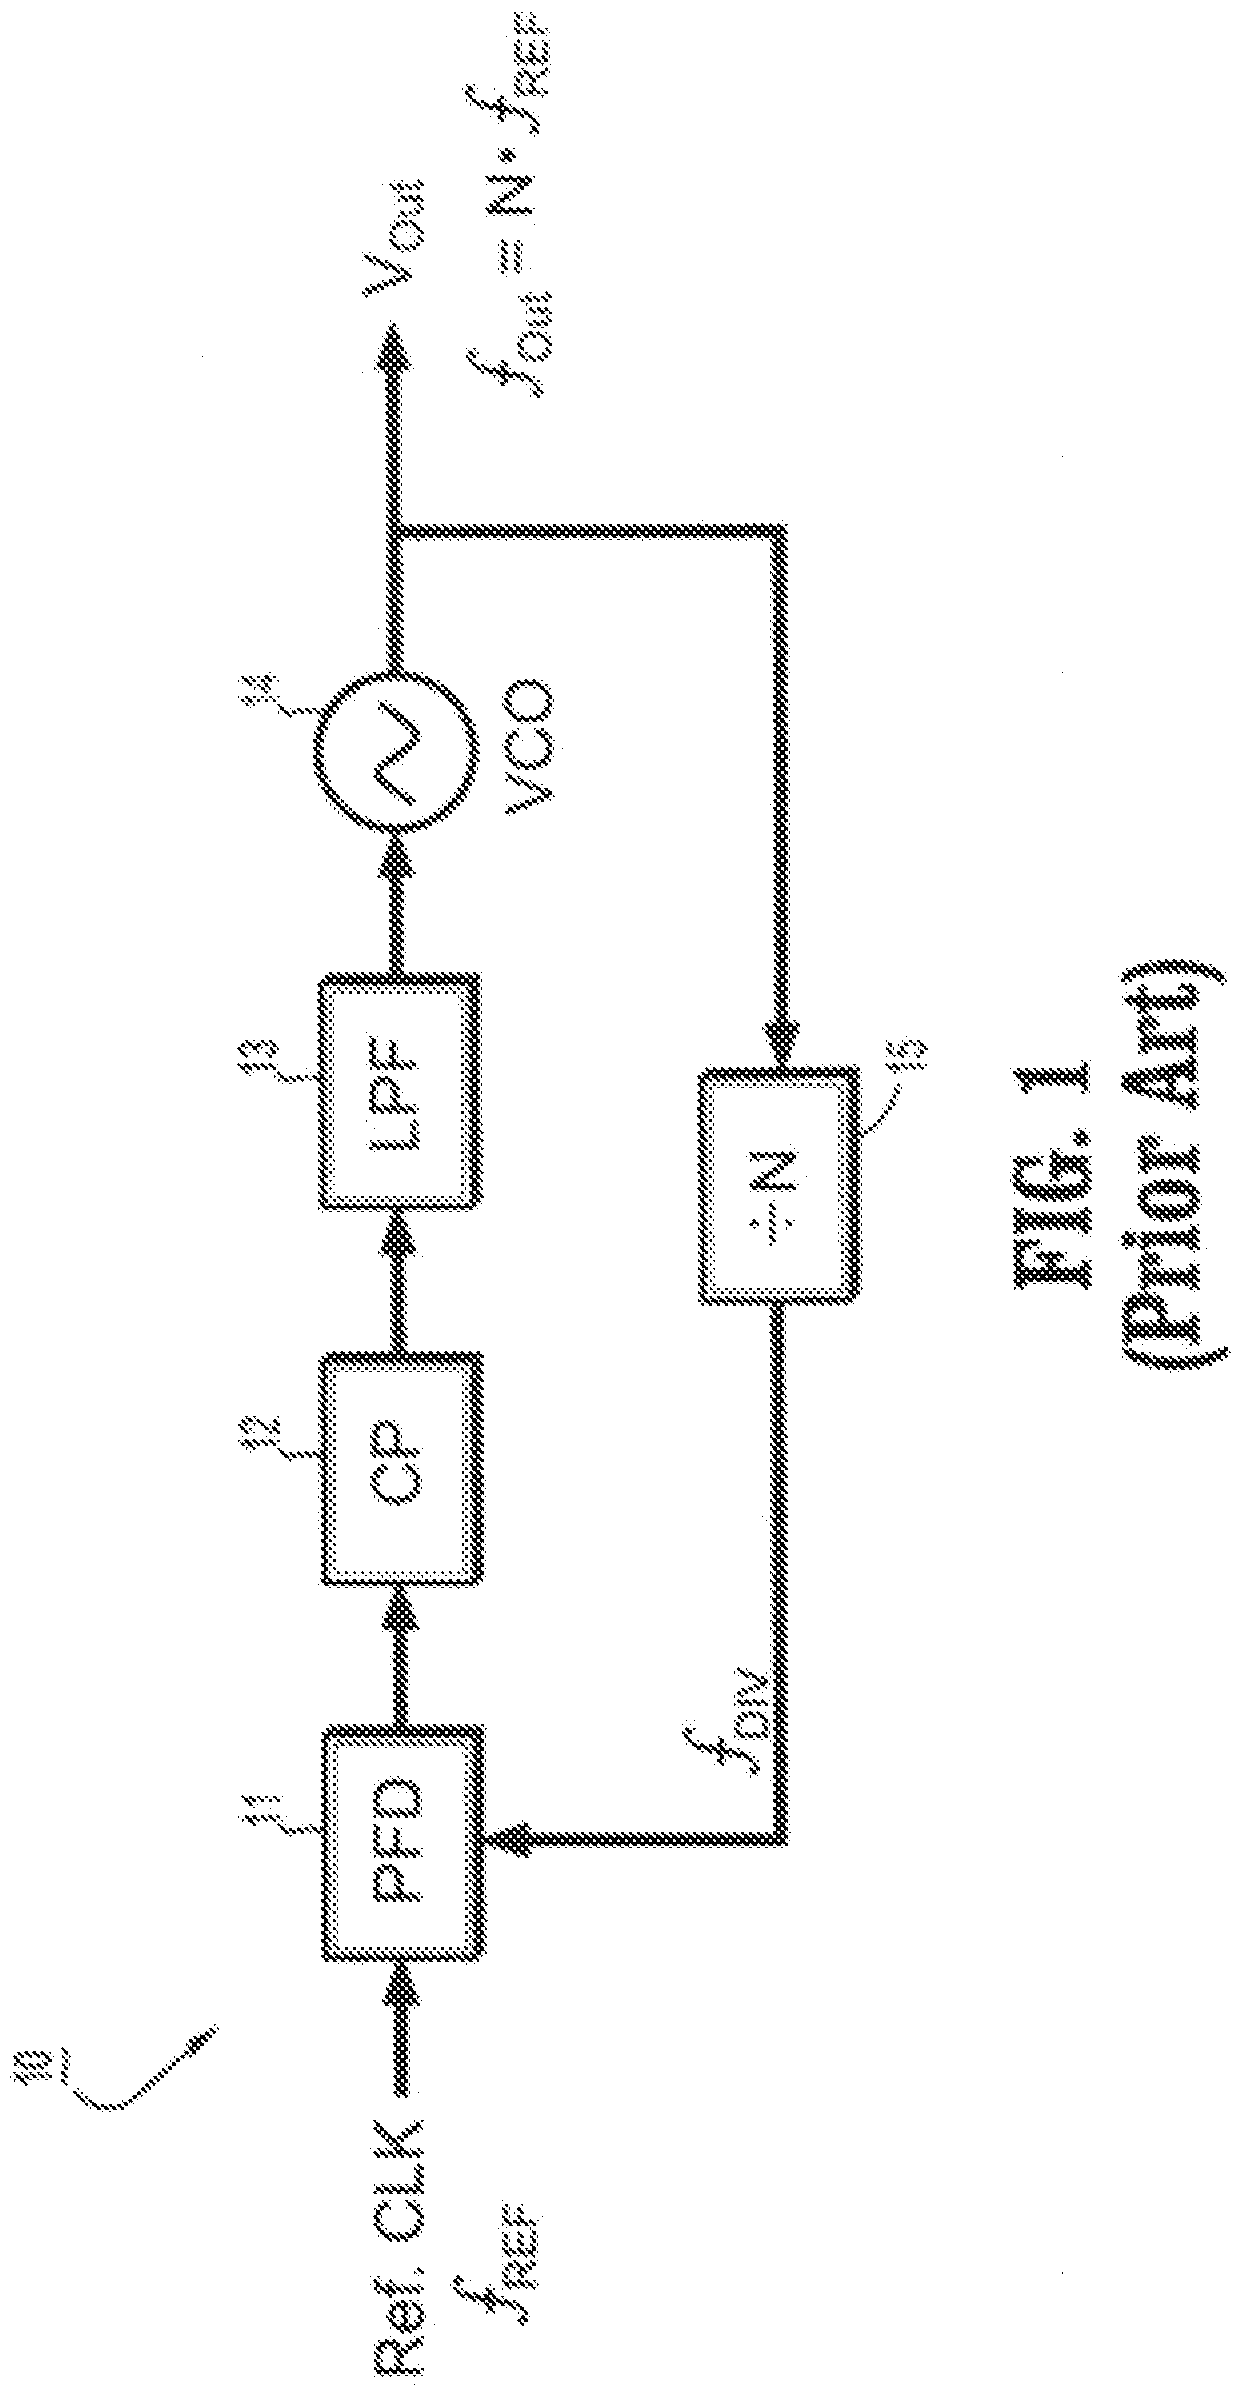 Circuits and methods for implementing sub-integer-n frequency dividers using phase rotators